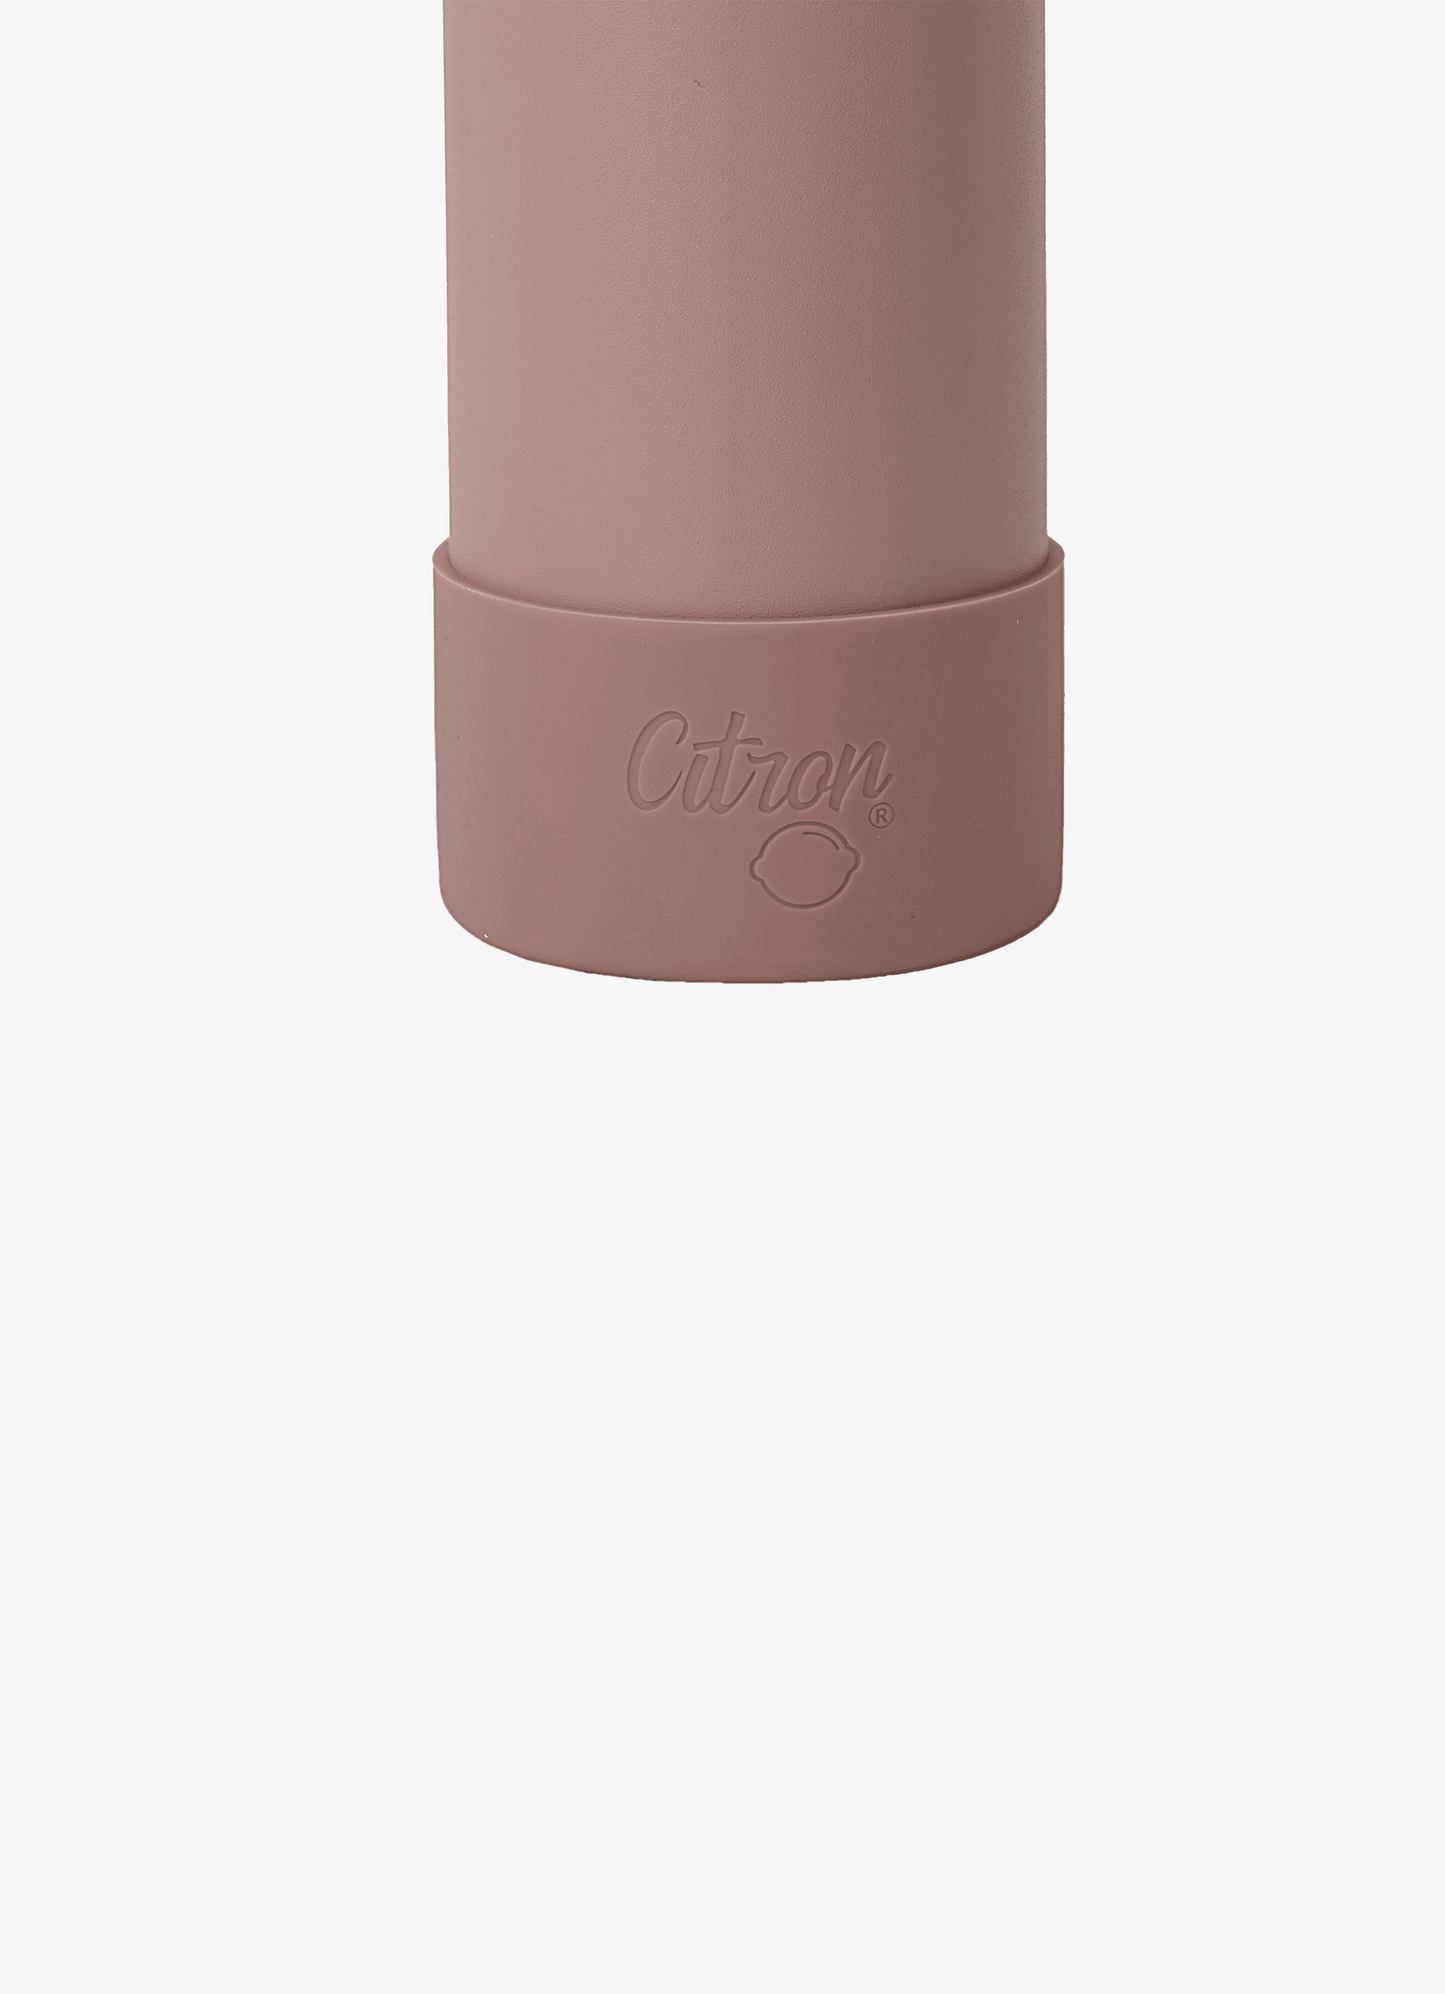 Silicone Bumper Replacement - All Bottles - Blush Pink